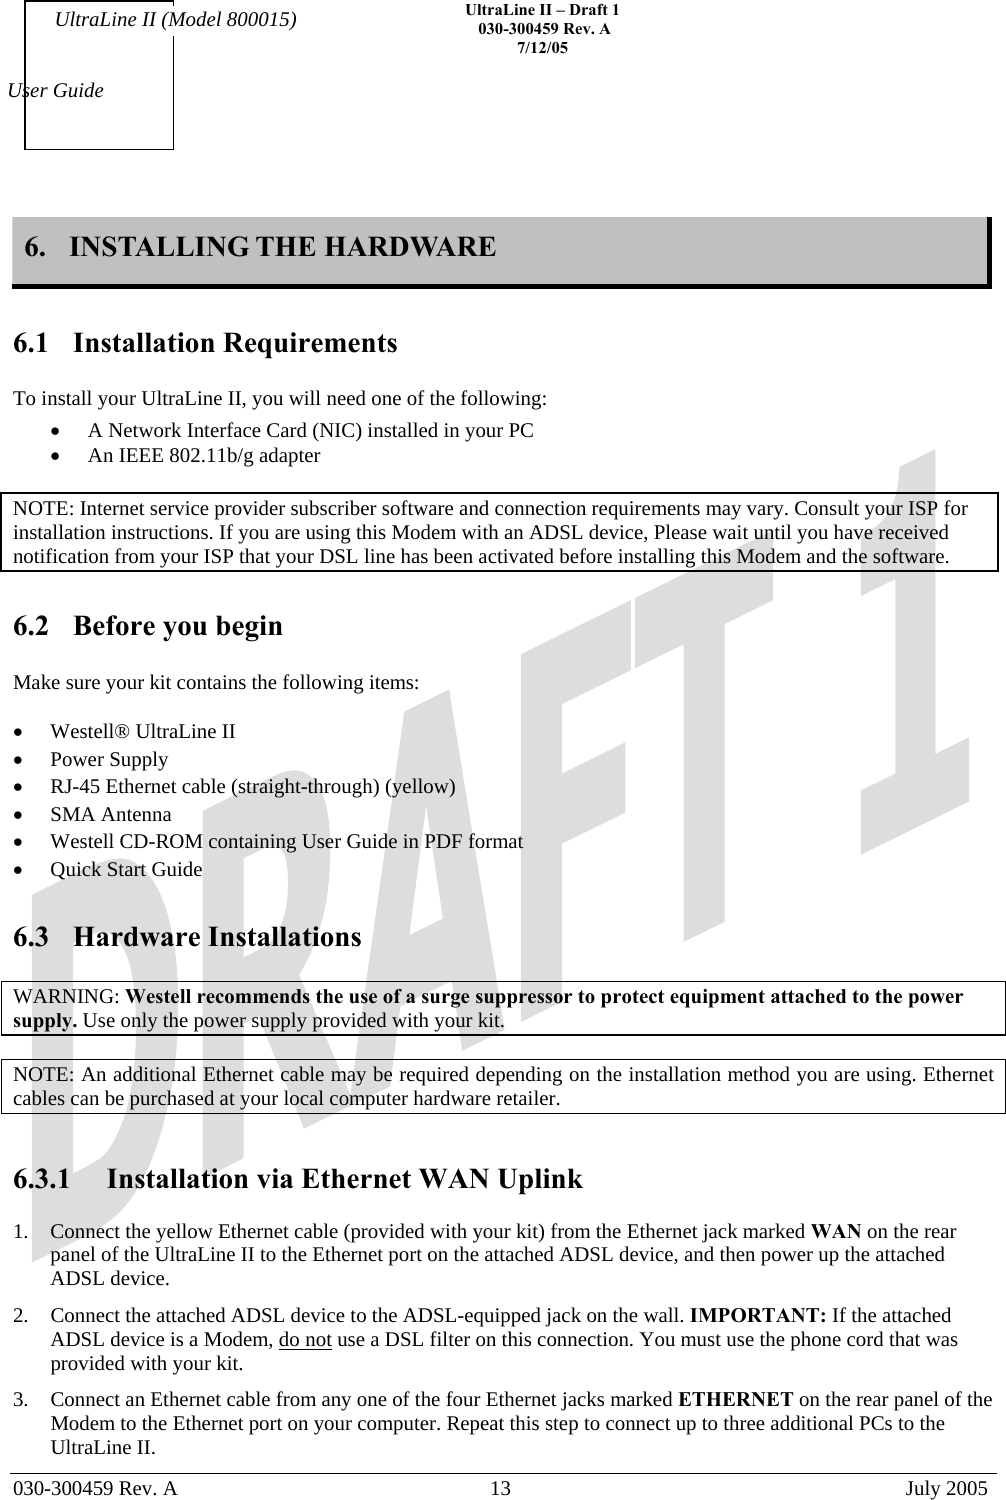    UltraLine II – Draft 1   030-300459 Rev. A 7/12/05   030-300459 Rev. A  13  July 2005  User Guide UltraLine II (Model 800015) 6.  INSTALLING THE HARDWARE   6.1 Installation Requirements  To install your UltraLine II, you will need one of the following: •  A Network Interface Card (NIC) installed in your PC   •  An IEEE 802.11b/g adapter   NOTE: Internet service provider subscriber software and connection requirements may vary. Consult your ISP for installation instructions. If you are using this Modem with an ADSL device, Please wait until you have received notification from your ISP that your DSL line has been activated before installing this Modem and the software.  6.2  Before you begin  Make sure your kit contains the following items:  •  Westell® UltraLine II  •  Power Supply •  RJ-45 Ethernet cable (straight-through) (yellow) •  SMA Antenna  •  Westell CD-ROM containing User Guide in PDF format •  Quick Start Guide  6.3 Hardware Installations  WARNING: Westell recommends the use of a surge suppressor to protect equipment attached to the power supply. Use only the power supply provided with your kit.  NOTE: An additional Ethernet cable may be required depending on the installation method you are using. Ethernet cables can be purchased at your local computer hardware retailer.   6.3.1  Installation via Ethernet WAN Uplink  1.  Connect the yellow Ethernet cable (provided with your kit) from the Ethernet jack marked WAN on the rear panel of the UltraLine II to the Ethernet port on the attached ADSL device, and then power up the attached ADSL device. 2.  Connect the attached ADSL device to the ADSL-equipped jack on the wall. IMPORTANT: If the attached ADSL device is a Modem, do not use a DSL filter on this connection. You must use the phone cord that was provided with your kit. 3.  Connect an Ethernet cable from any one of the four Ethernet jacks marked ETHERNET on the rear panel of the Modem to the Ethernet port on your computer. Repeat this step to connect up to three additional PCs to the UltraLine II. 